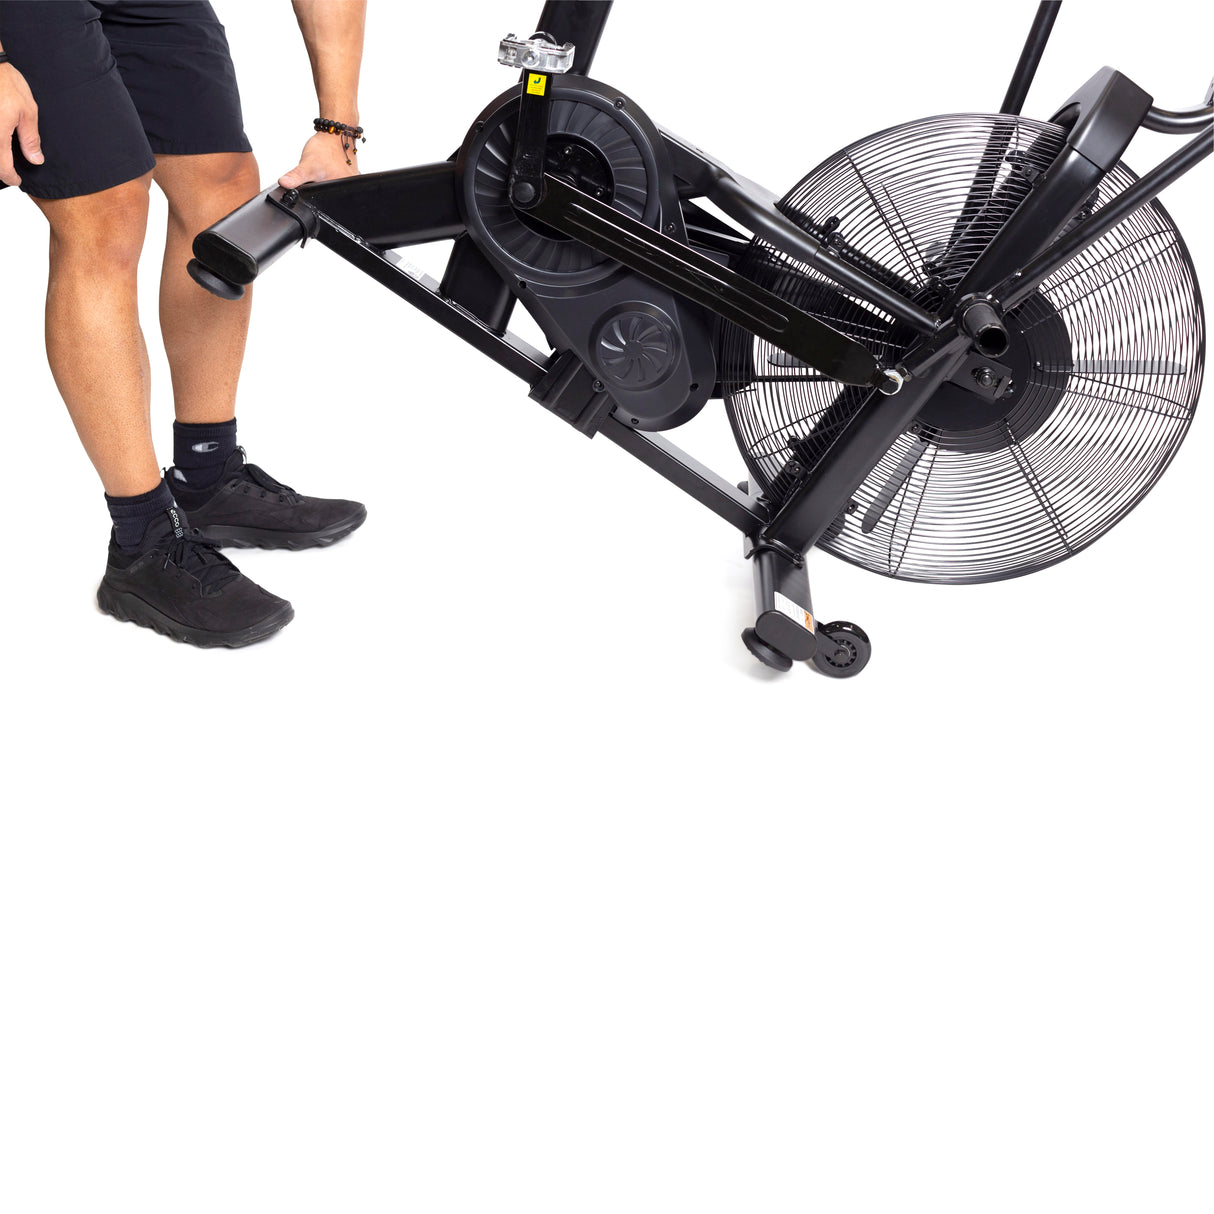 Residential Air Bike is portable and easy to move around. 